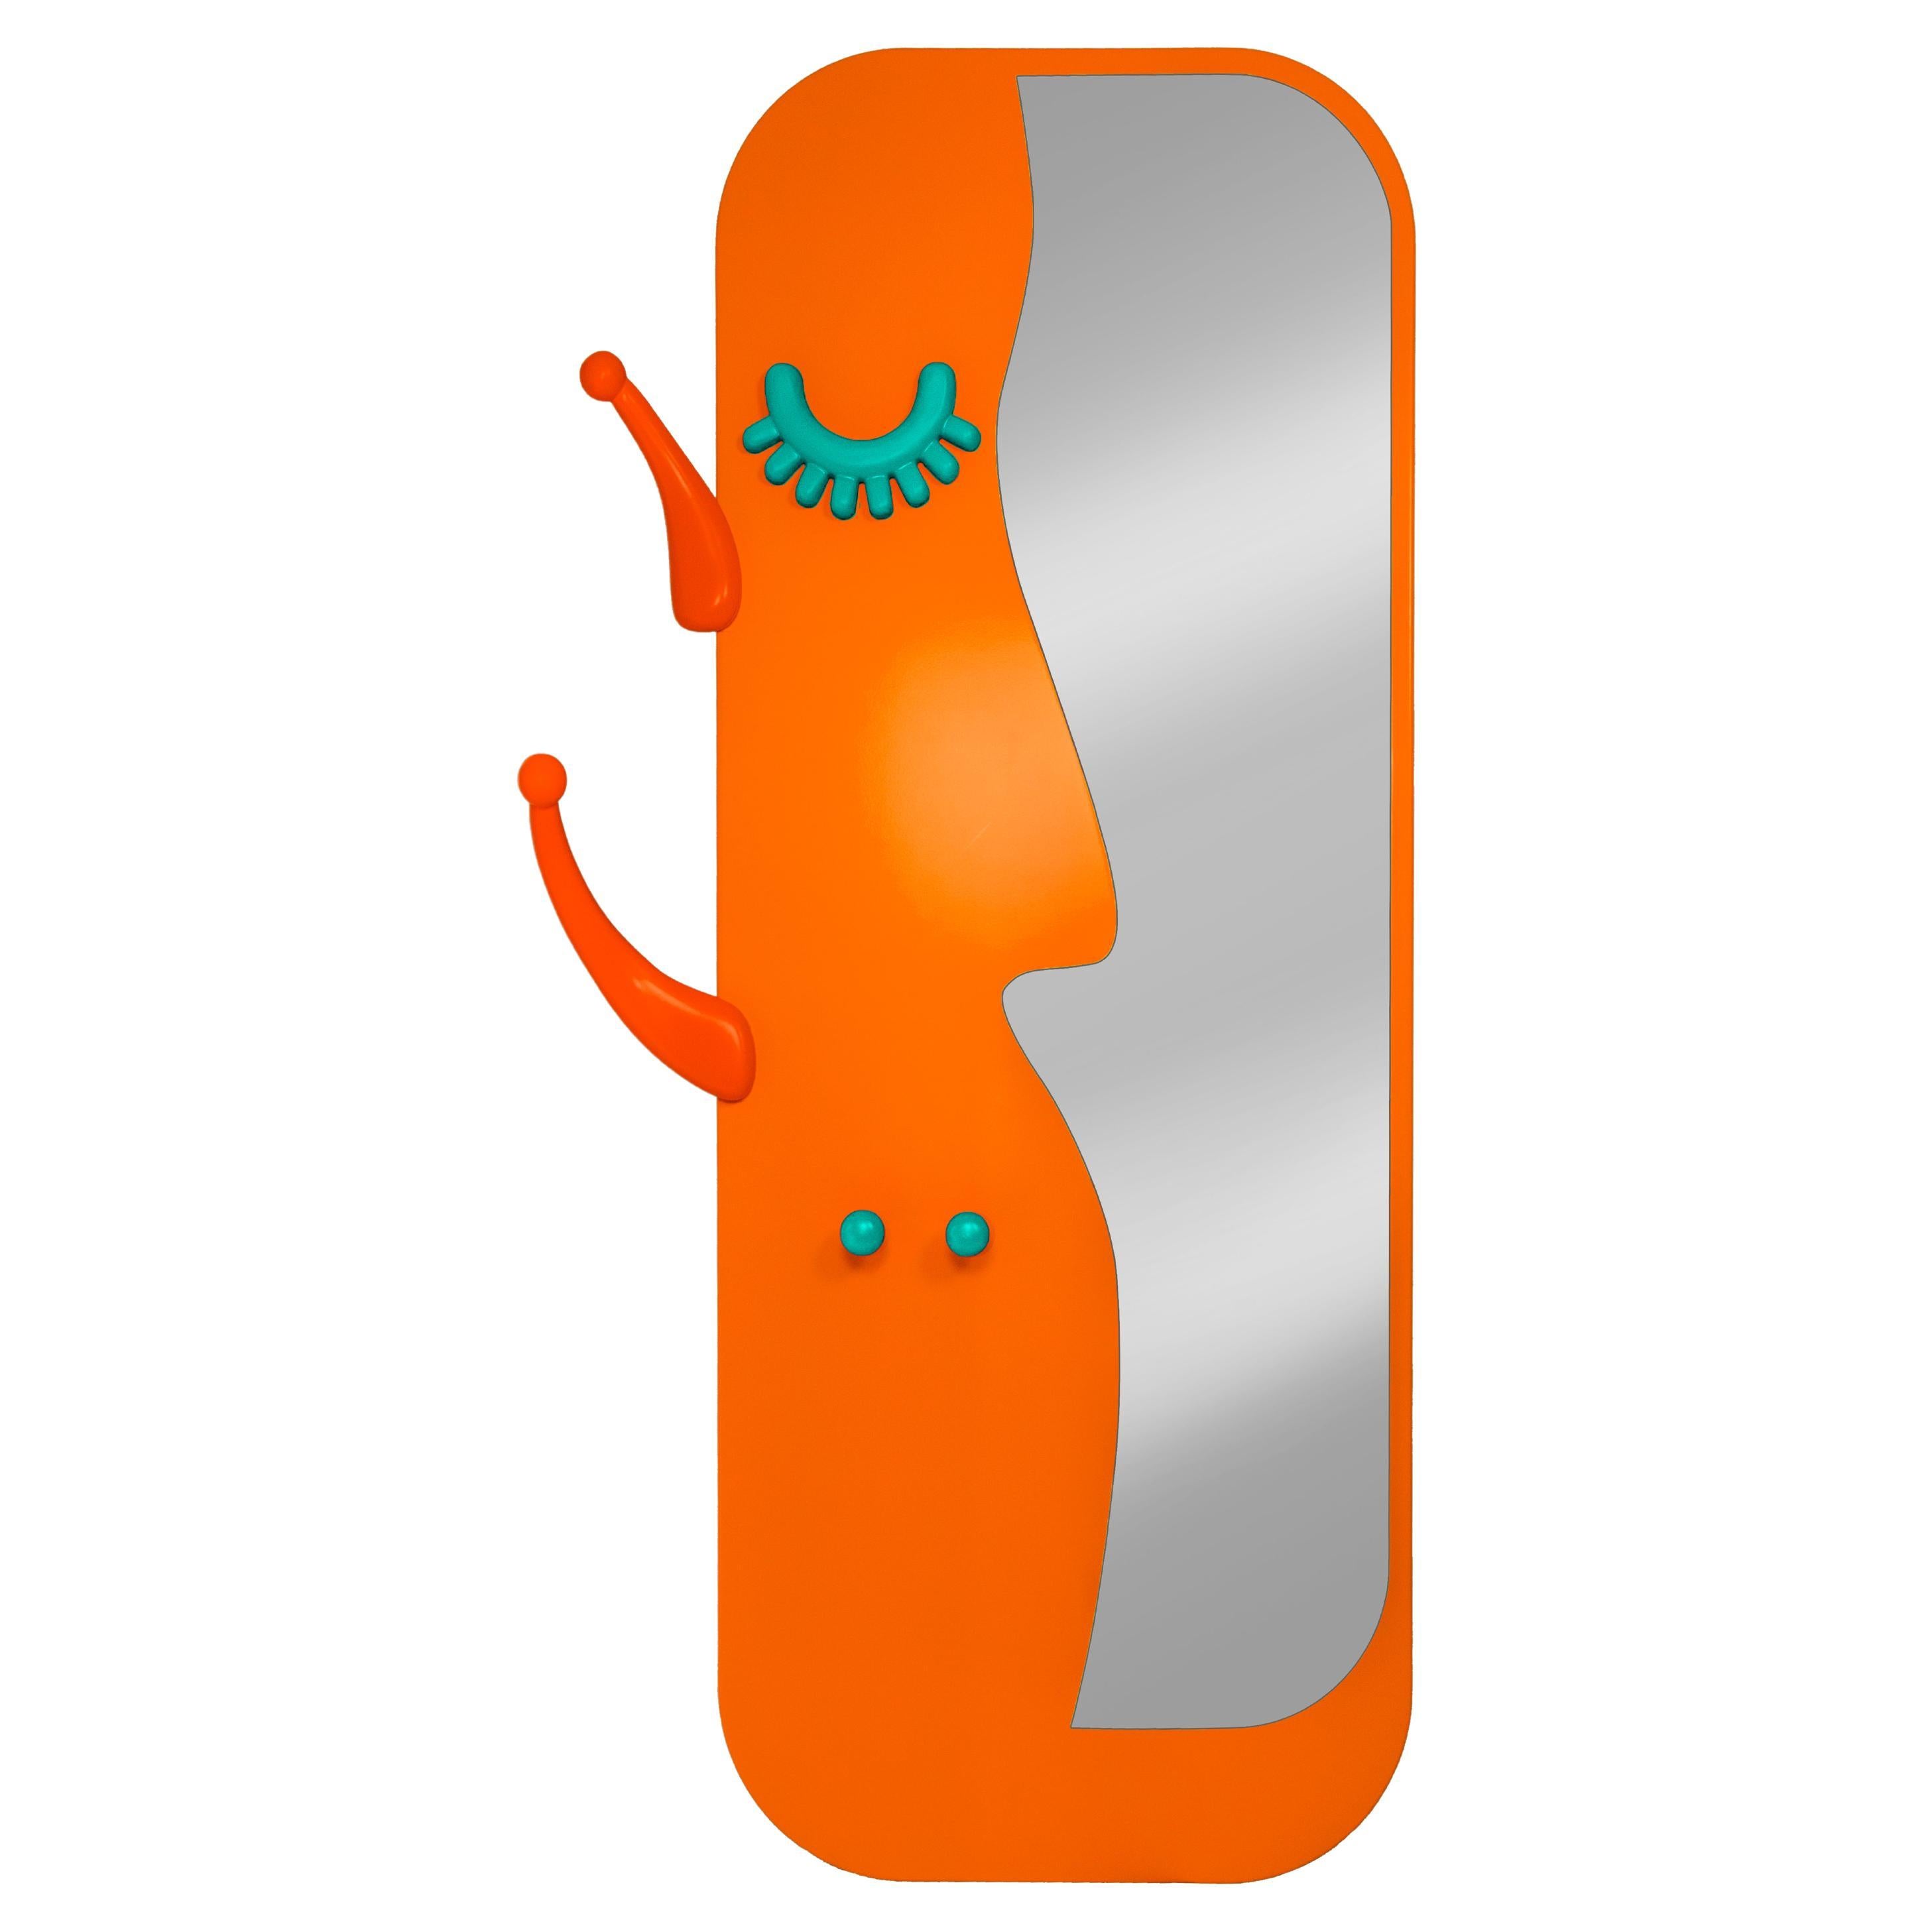 Face to Face Wall Mirror: Lively Orange Dressing Mirror with Hanger